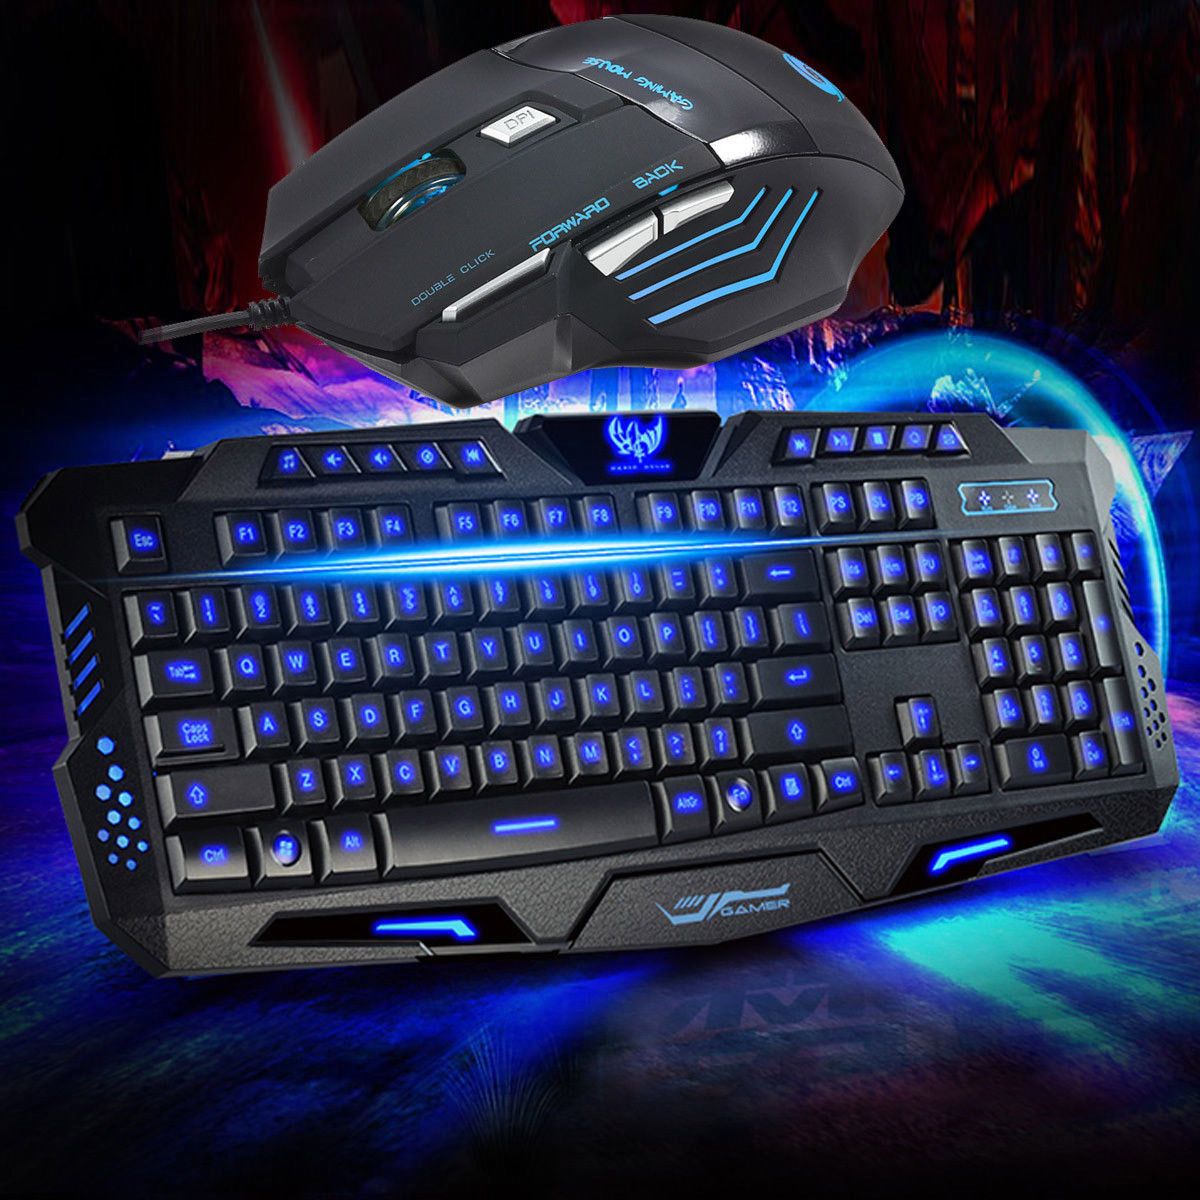 Review of the Best Gaming Keyboards: Mechanical vs Membrane keyboards